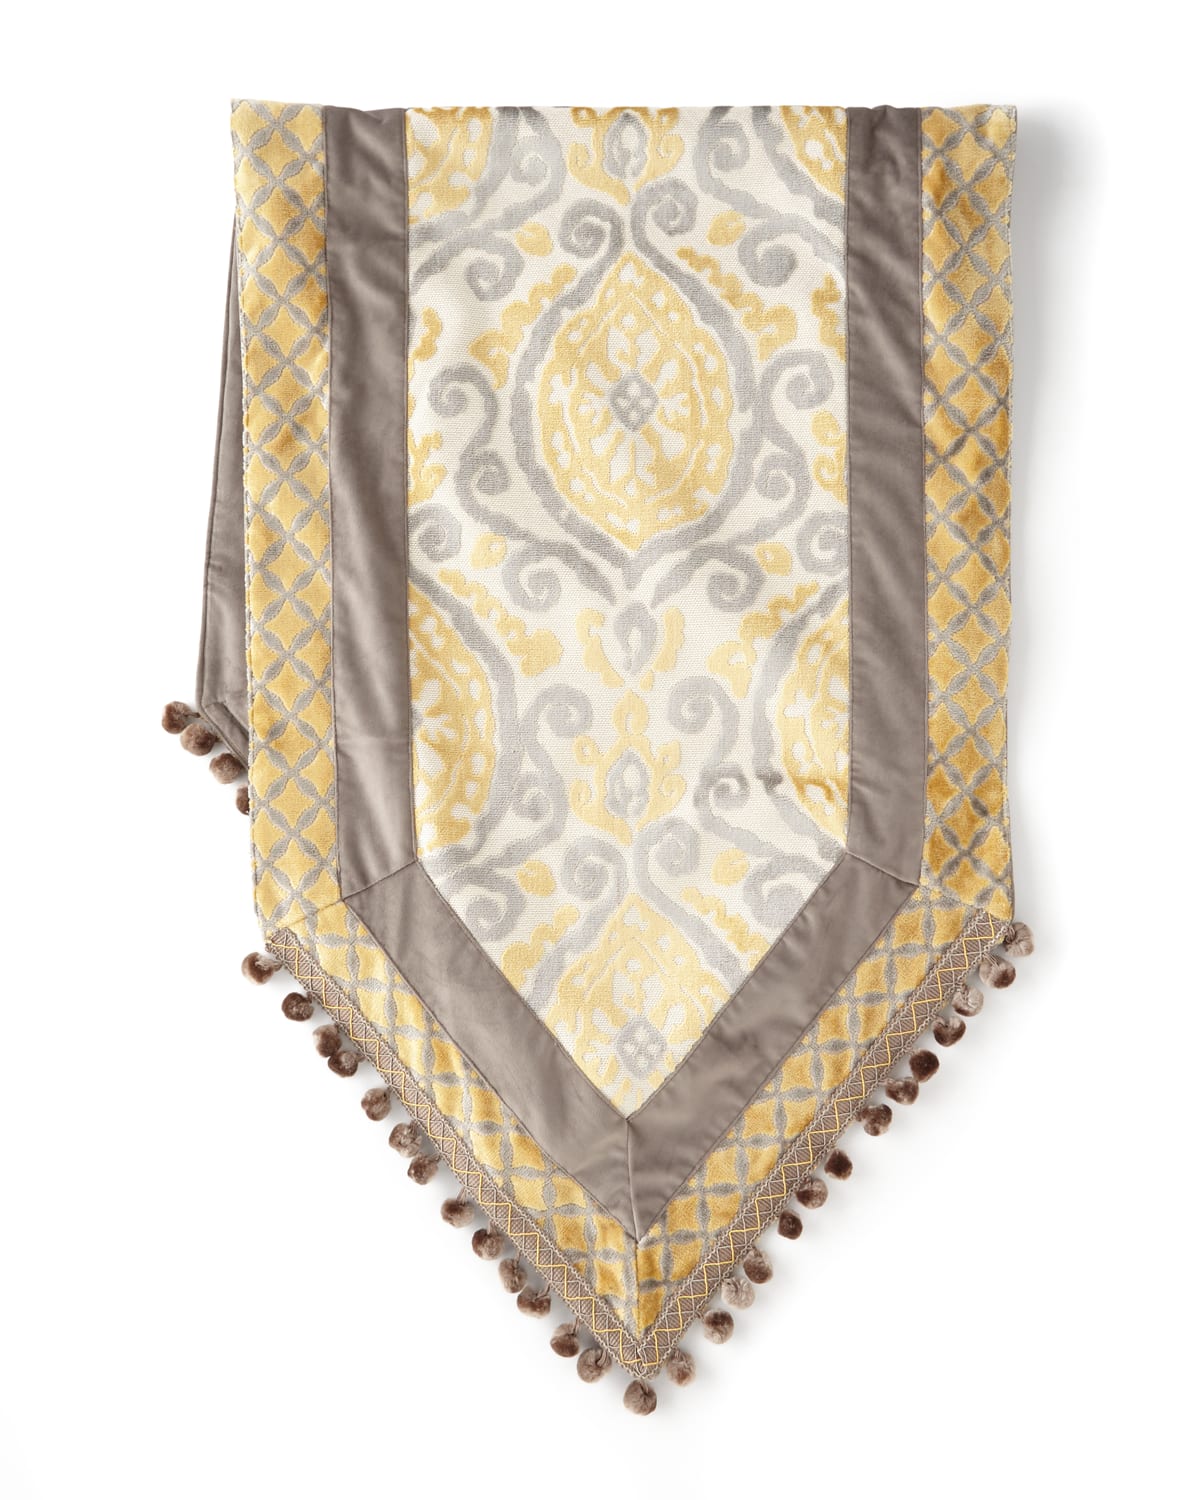 Image Austin Horn Collection Lanai 90" Table Runner